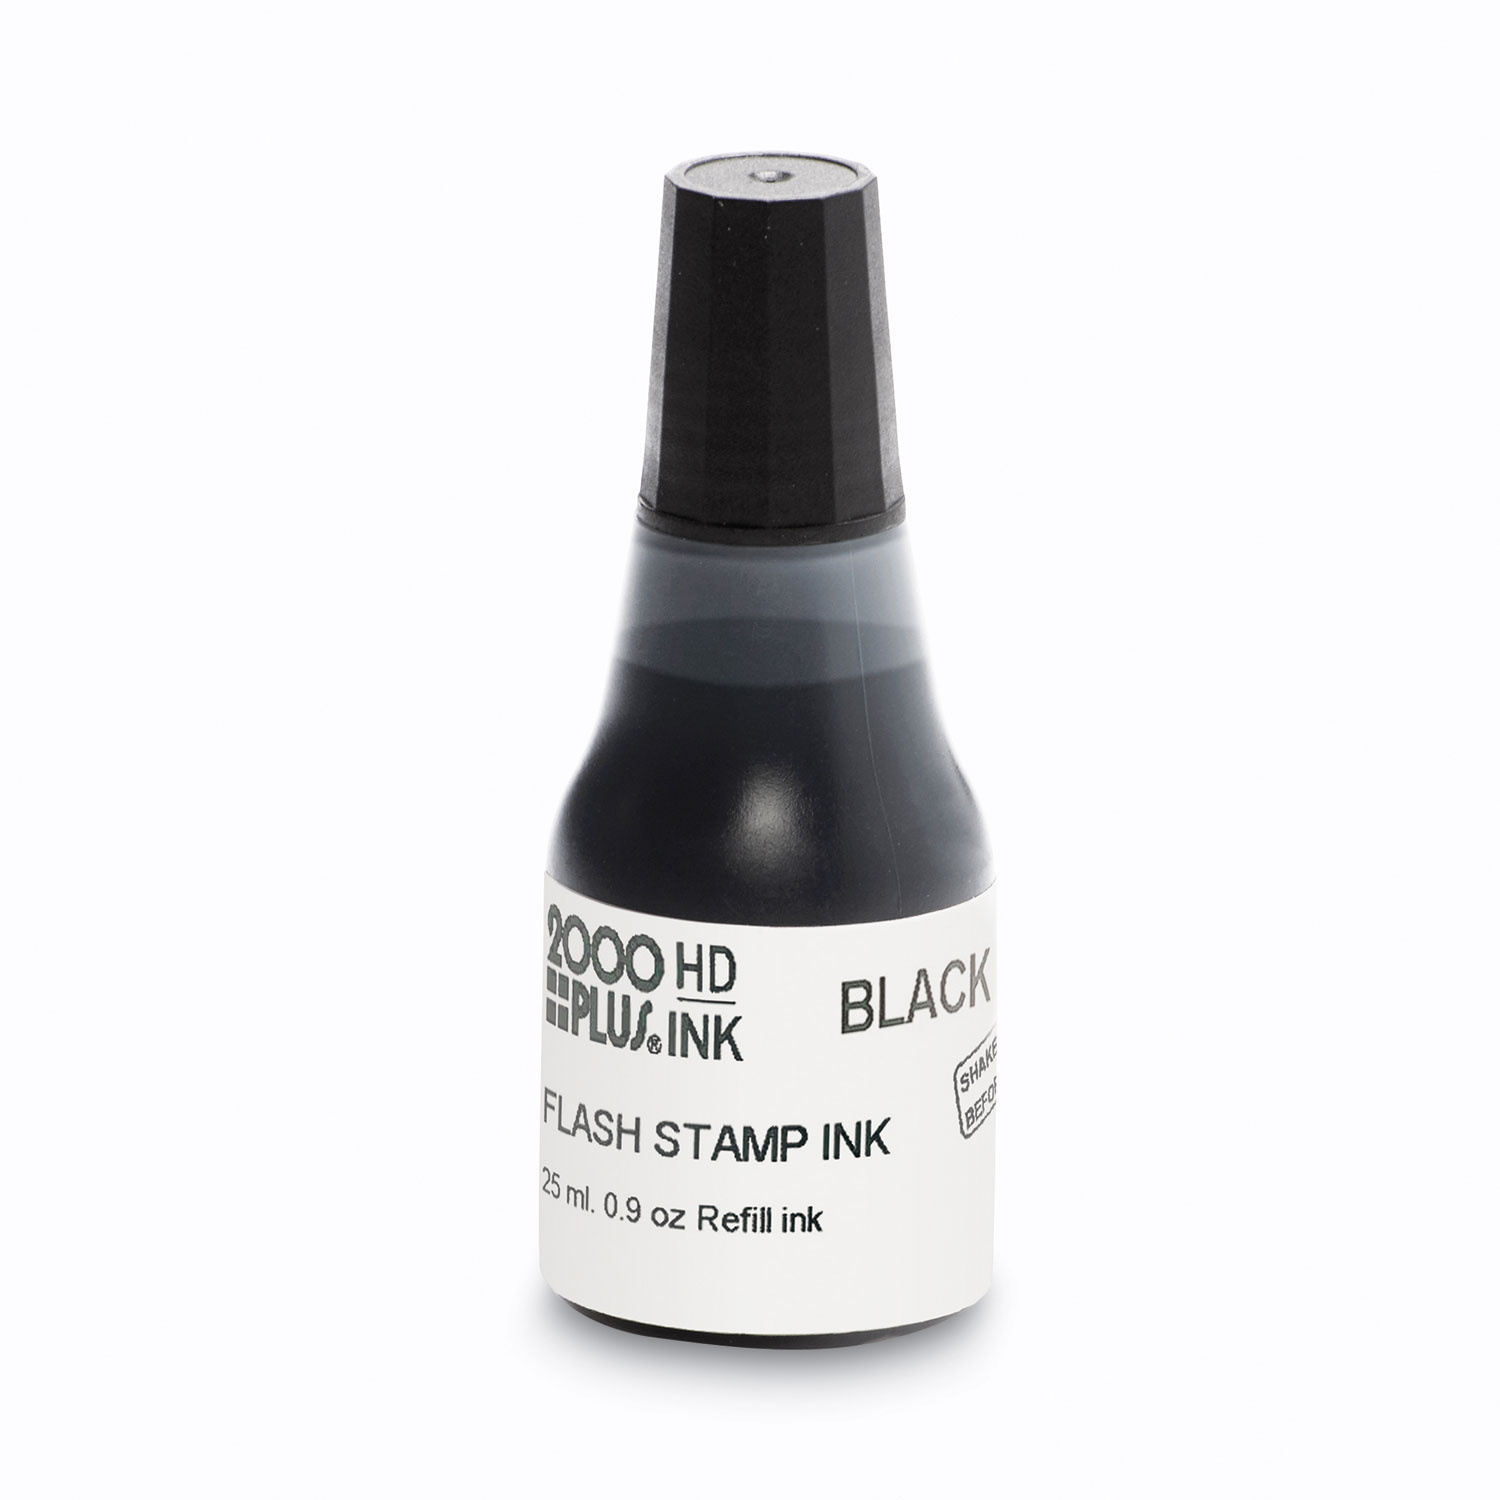 COSCO Self-inking Stamp Pad Refill Ink - Zerbee